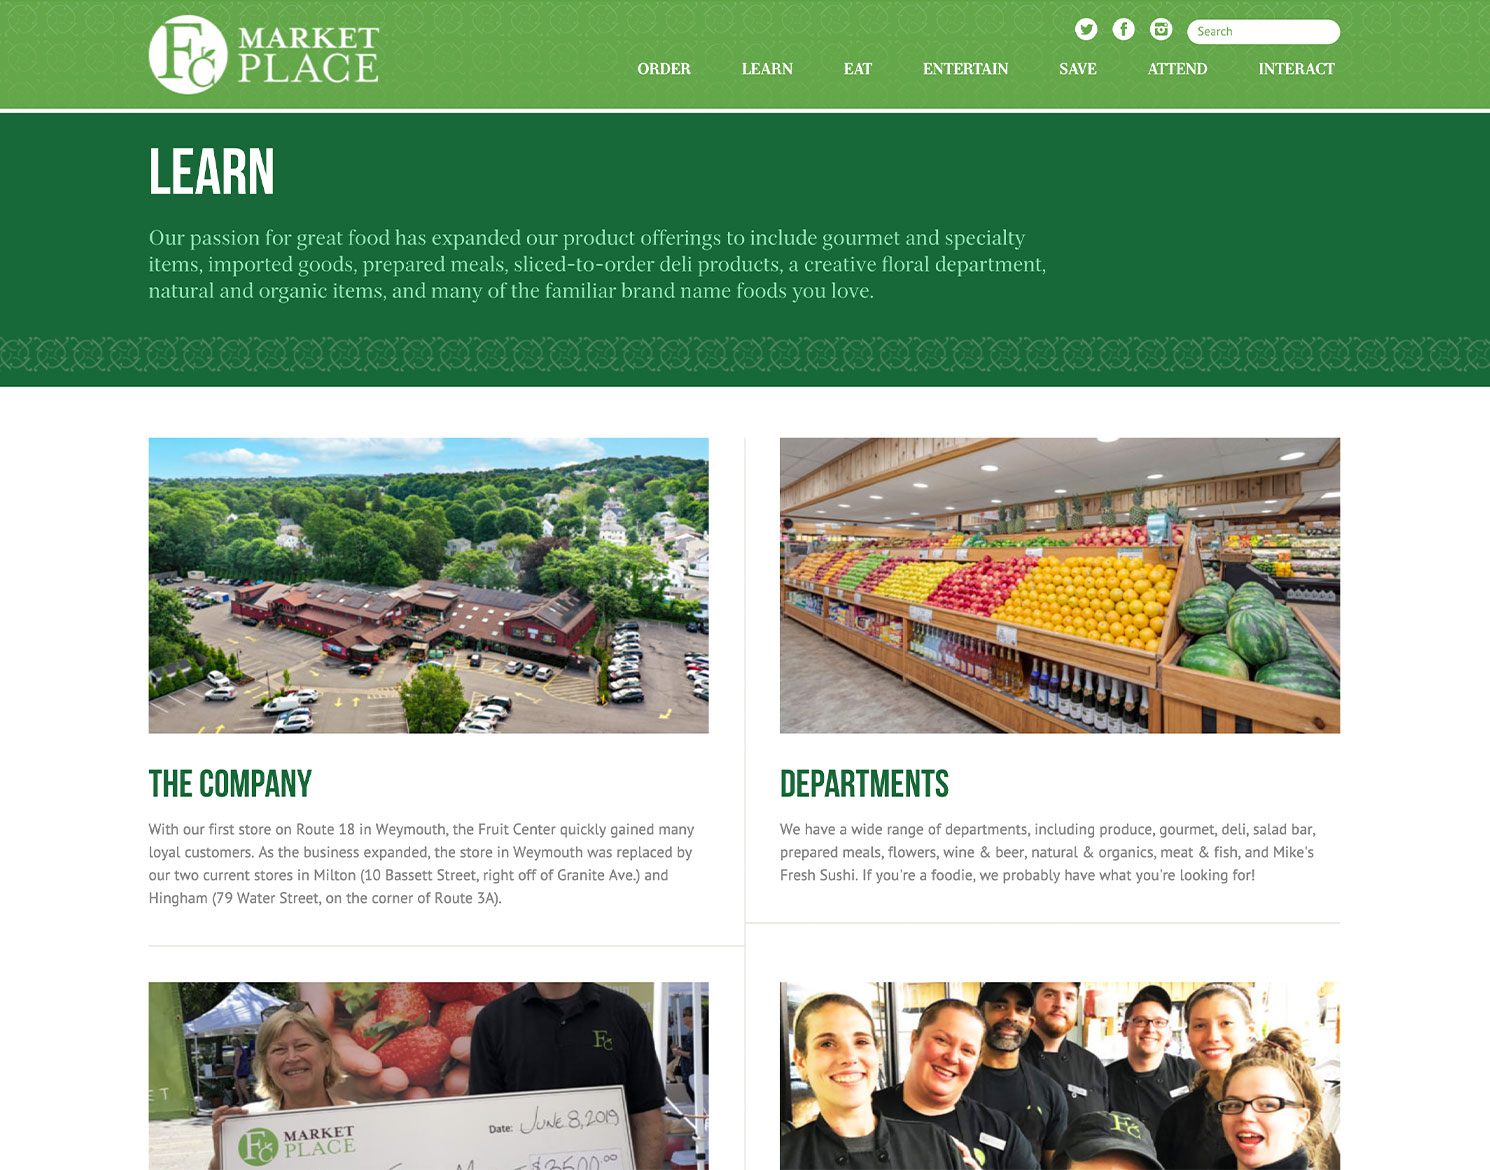 Fruit Center Market Place website 'learn' page